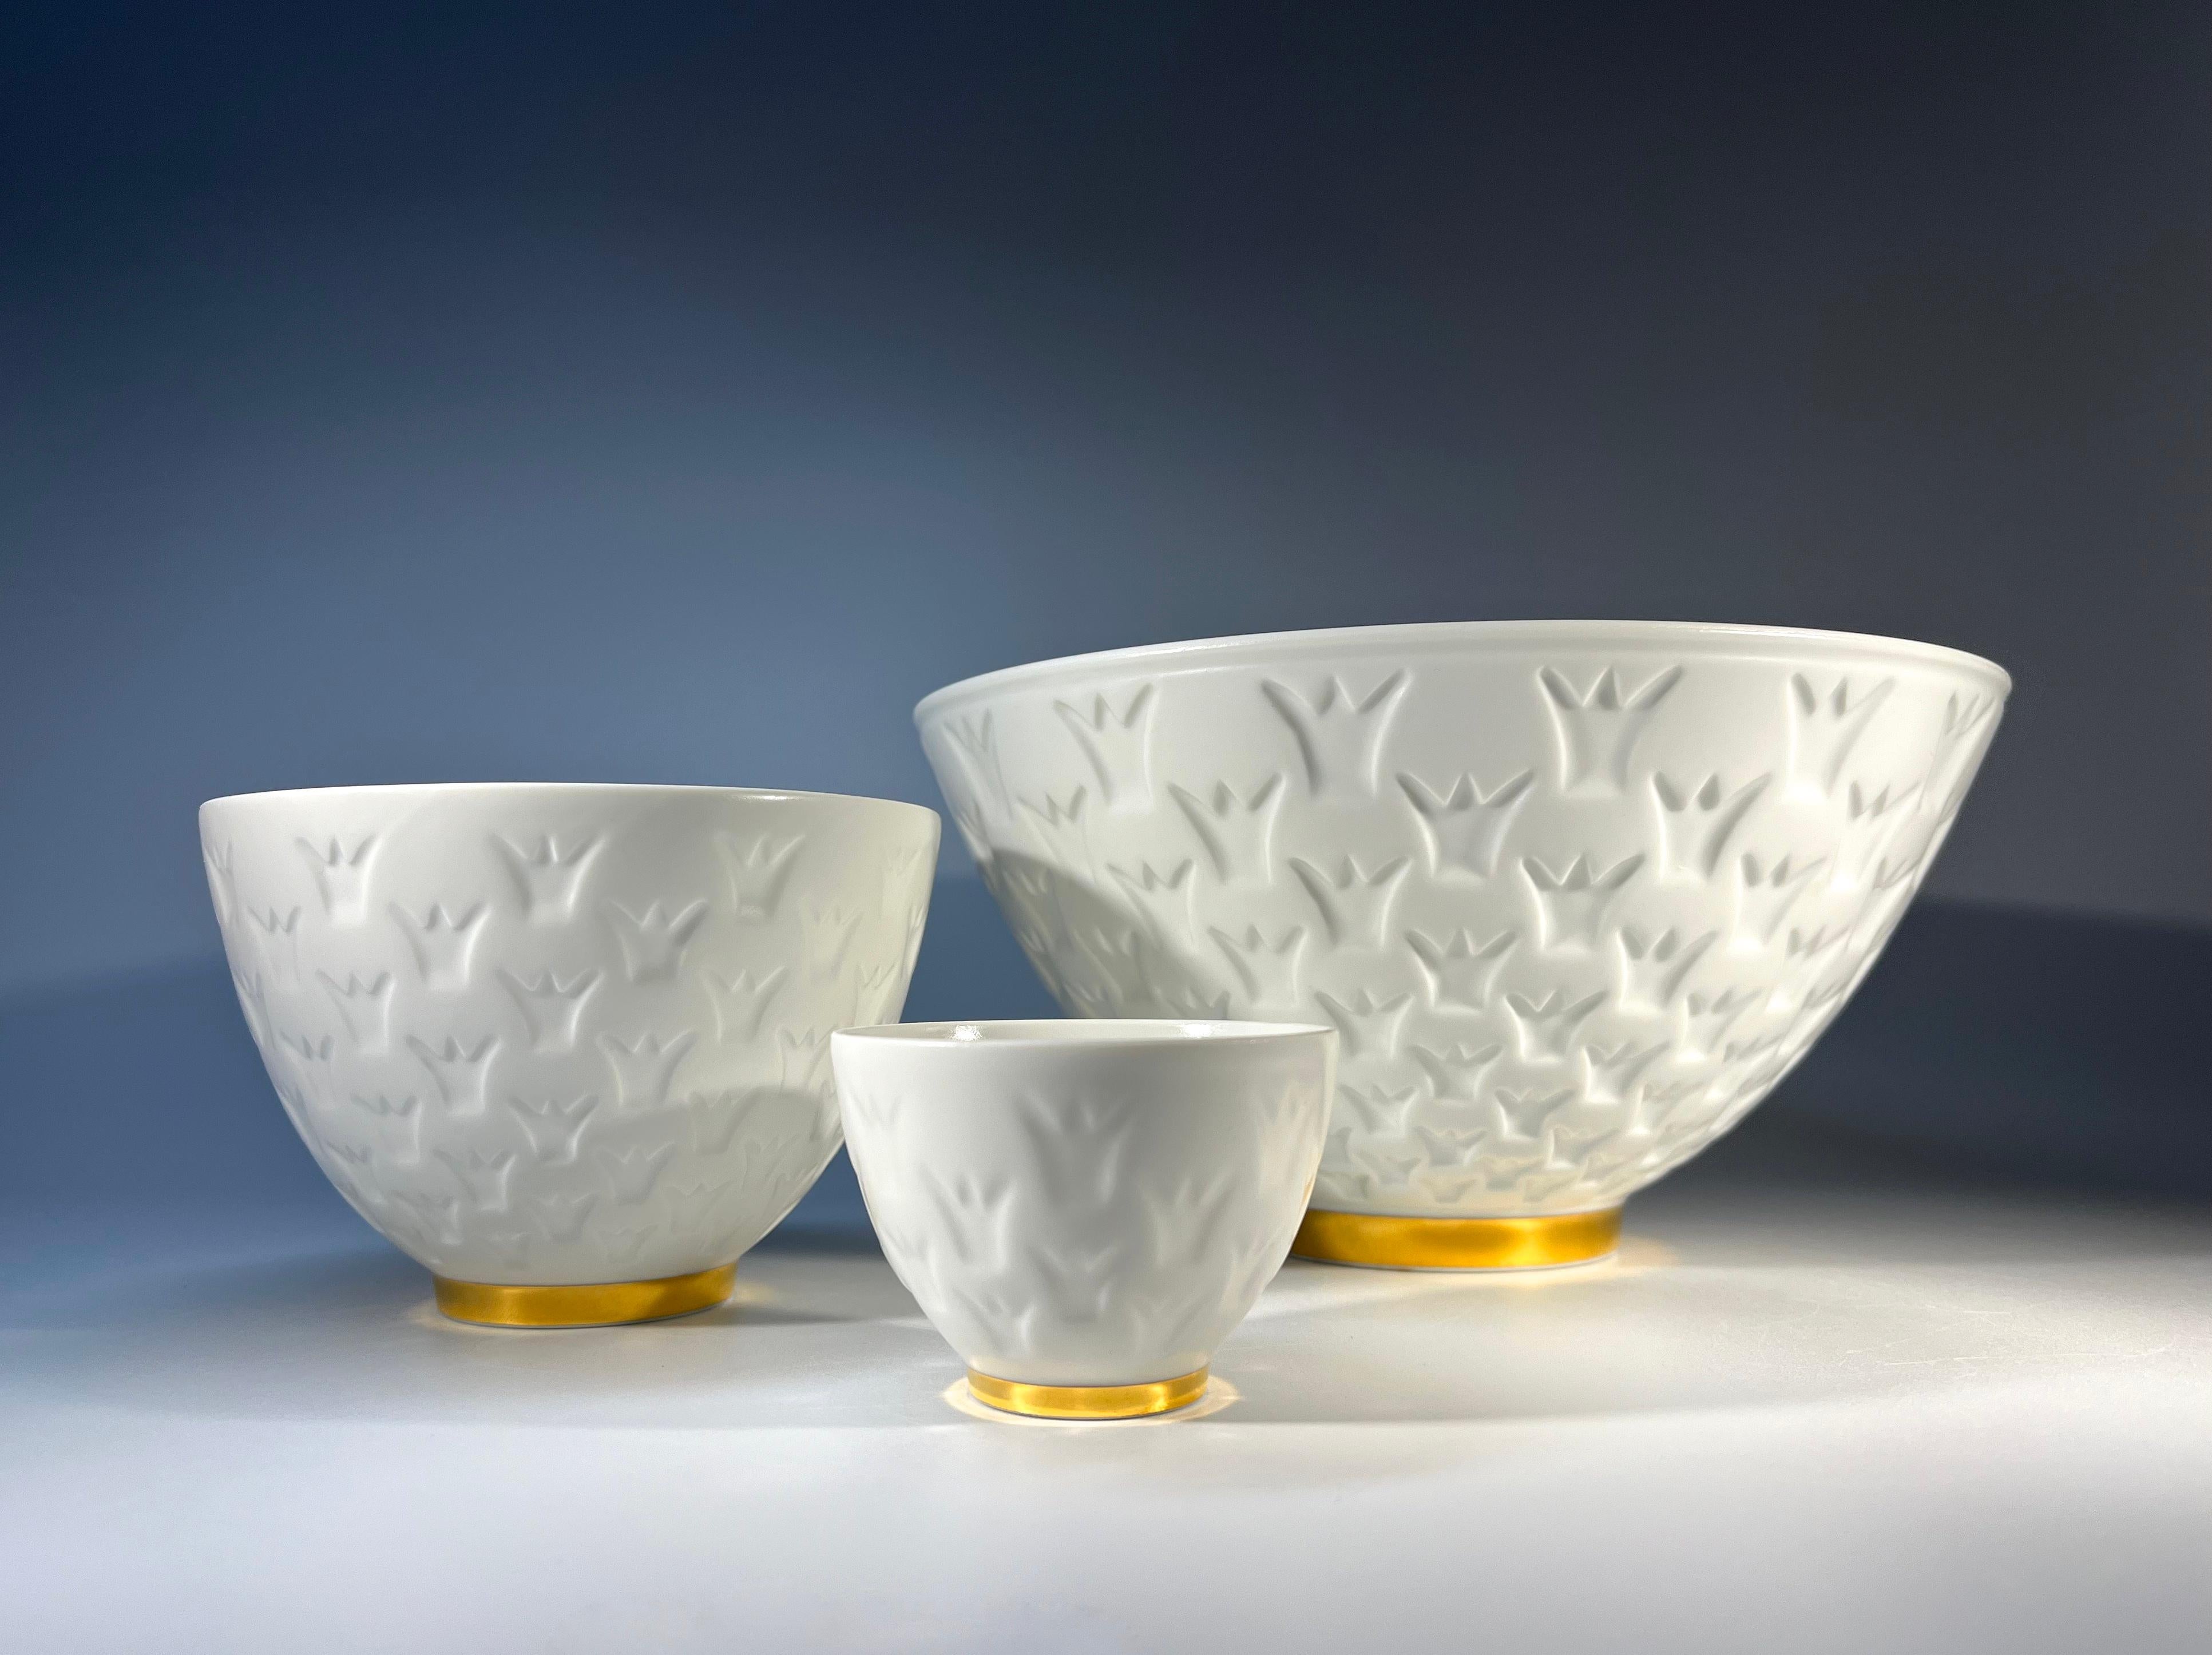 Fabulous set of three Crown bowls, designed by Gunnar Nylund for Rörstrand, Sweden
Beautifully crafted fine porcelain of the purest white, each decorated with bright gilded bands
Believed this set was presented to a member of the Swedish Air Force